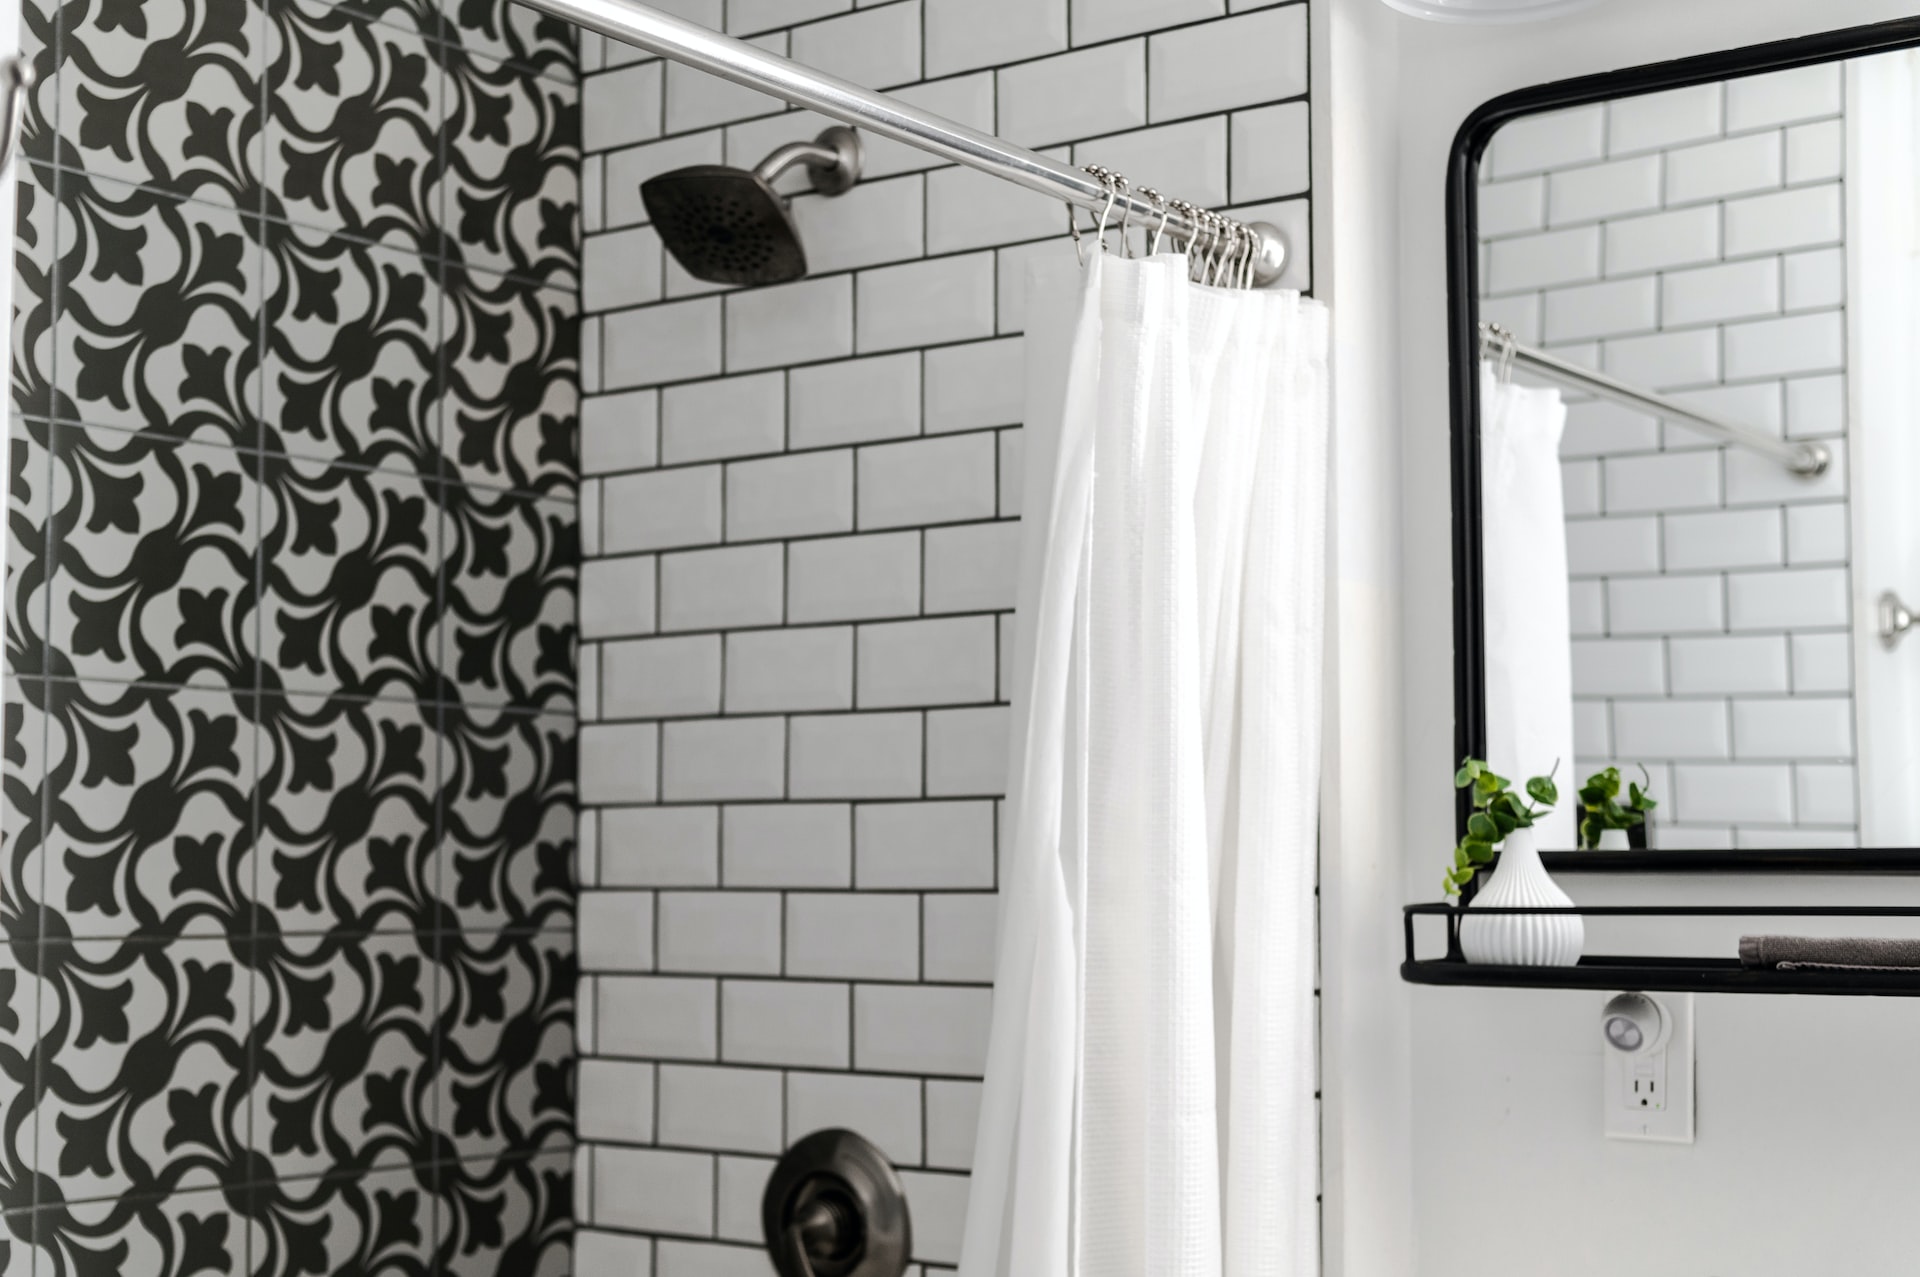 A modern bathroom with a black shower head, elevating the space